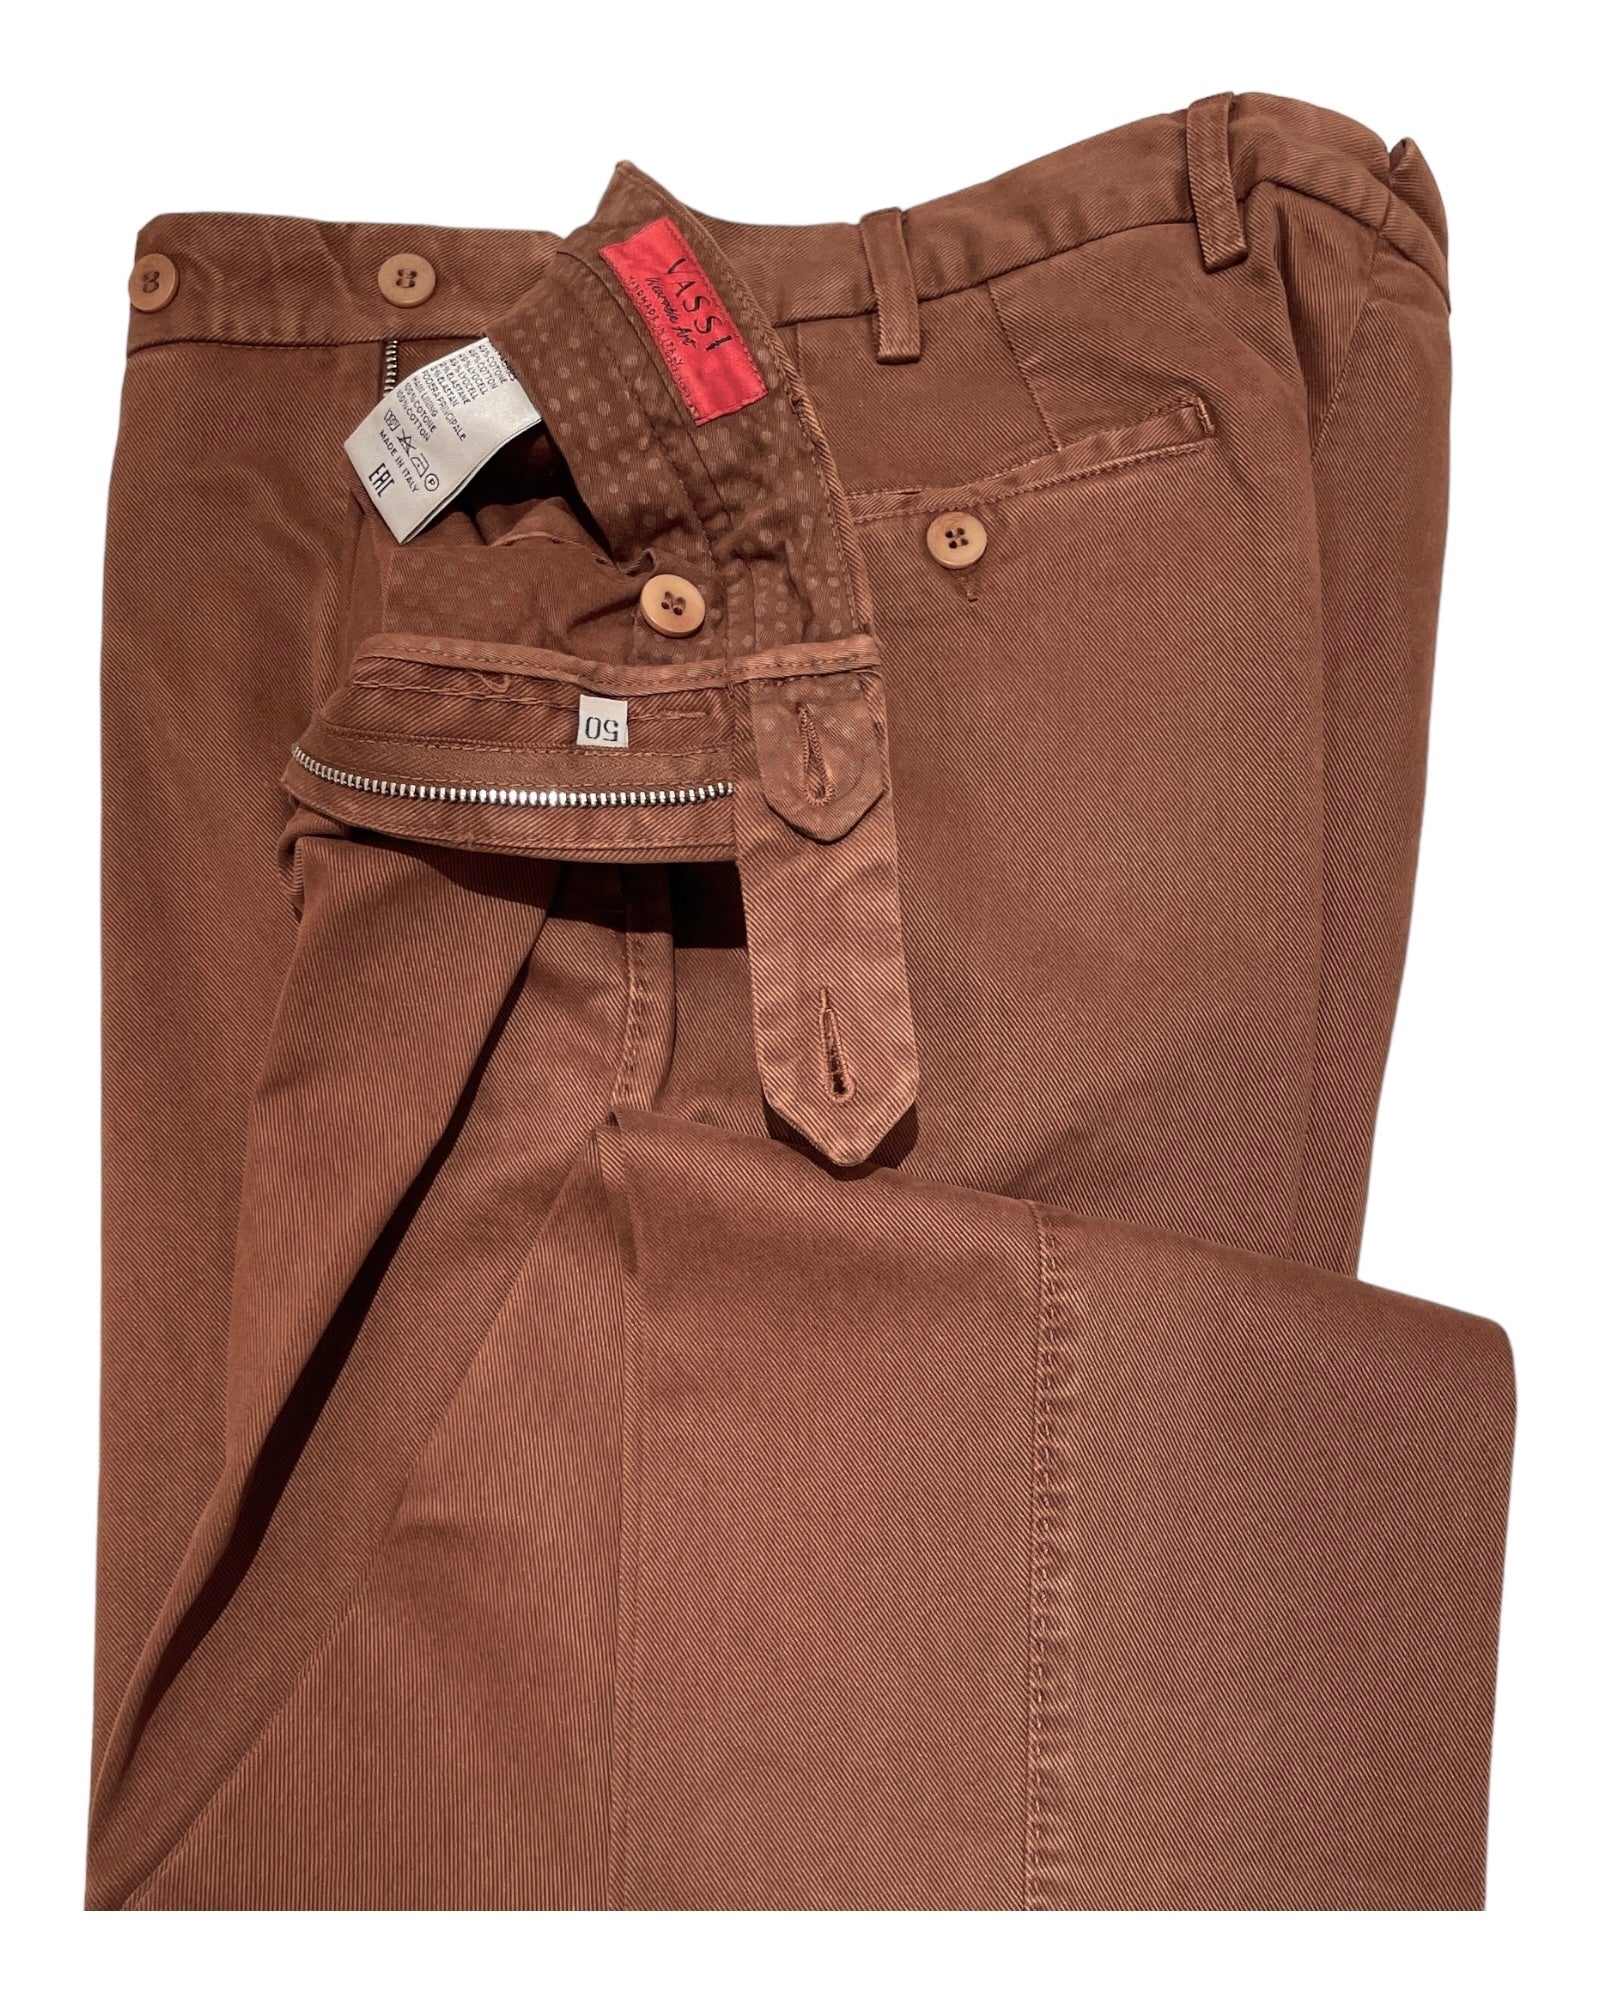 Winter Stretch Cotton Chino Pants - Rust Brown